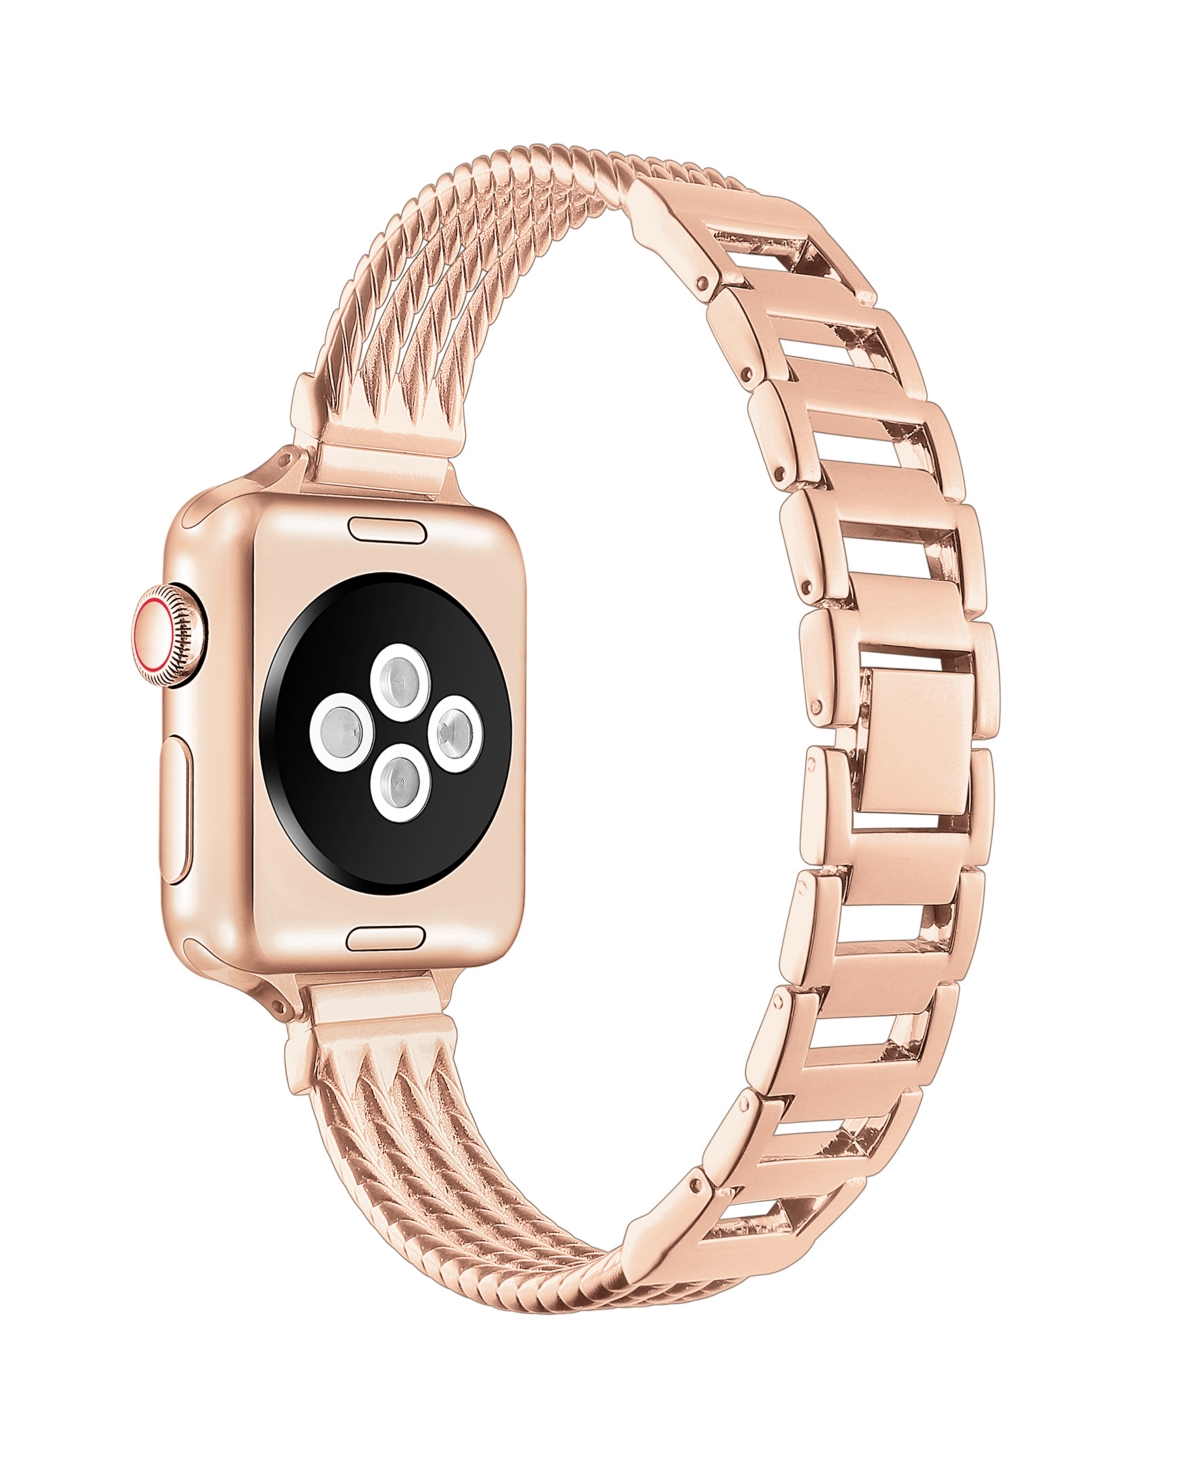 Shop Posh Tech Unisex Clara Stainless Steel Bracelet Band For Apple Watch Size-42mm,44mm,45mm,49mm In Rose Gold